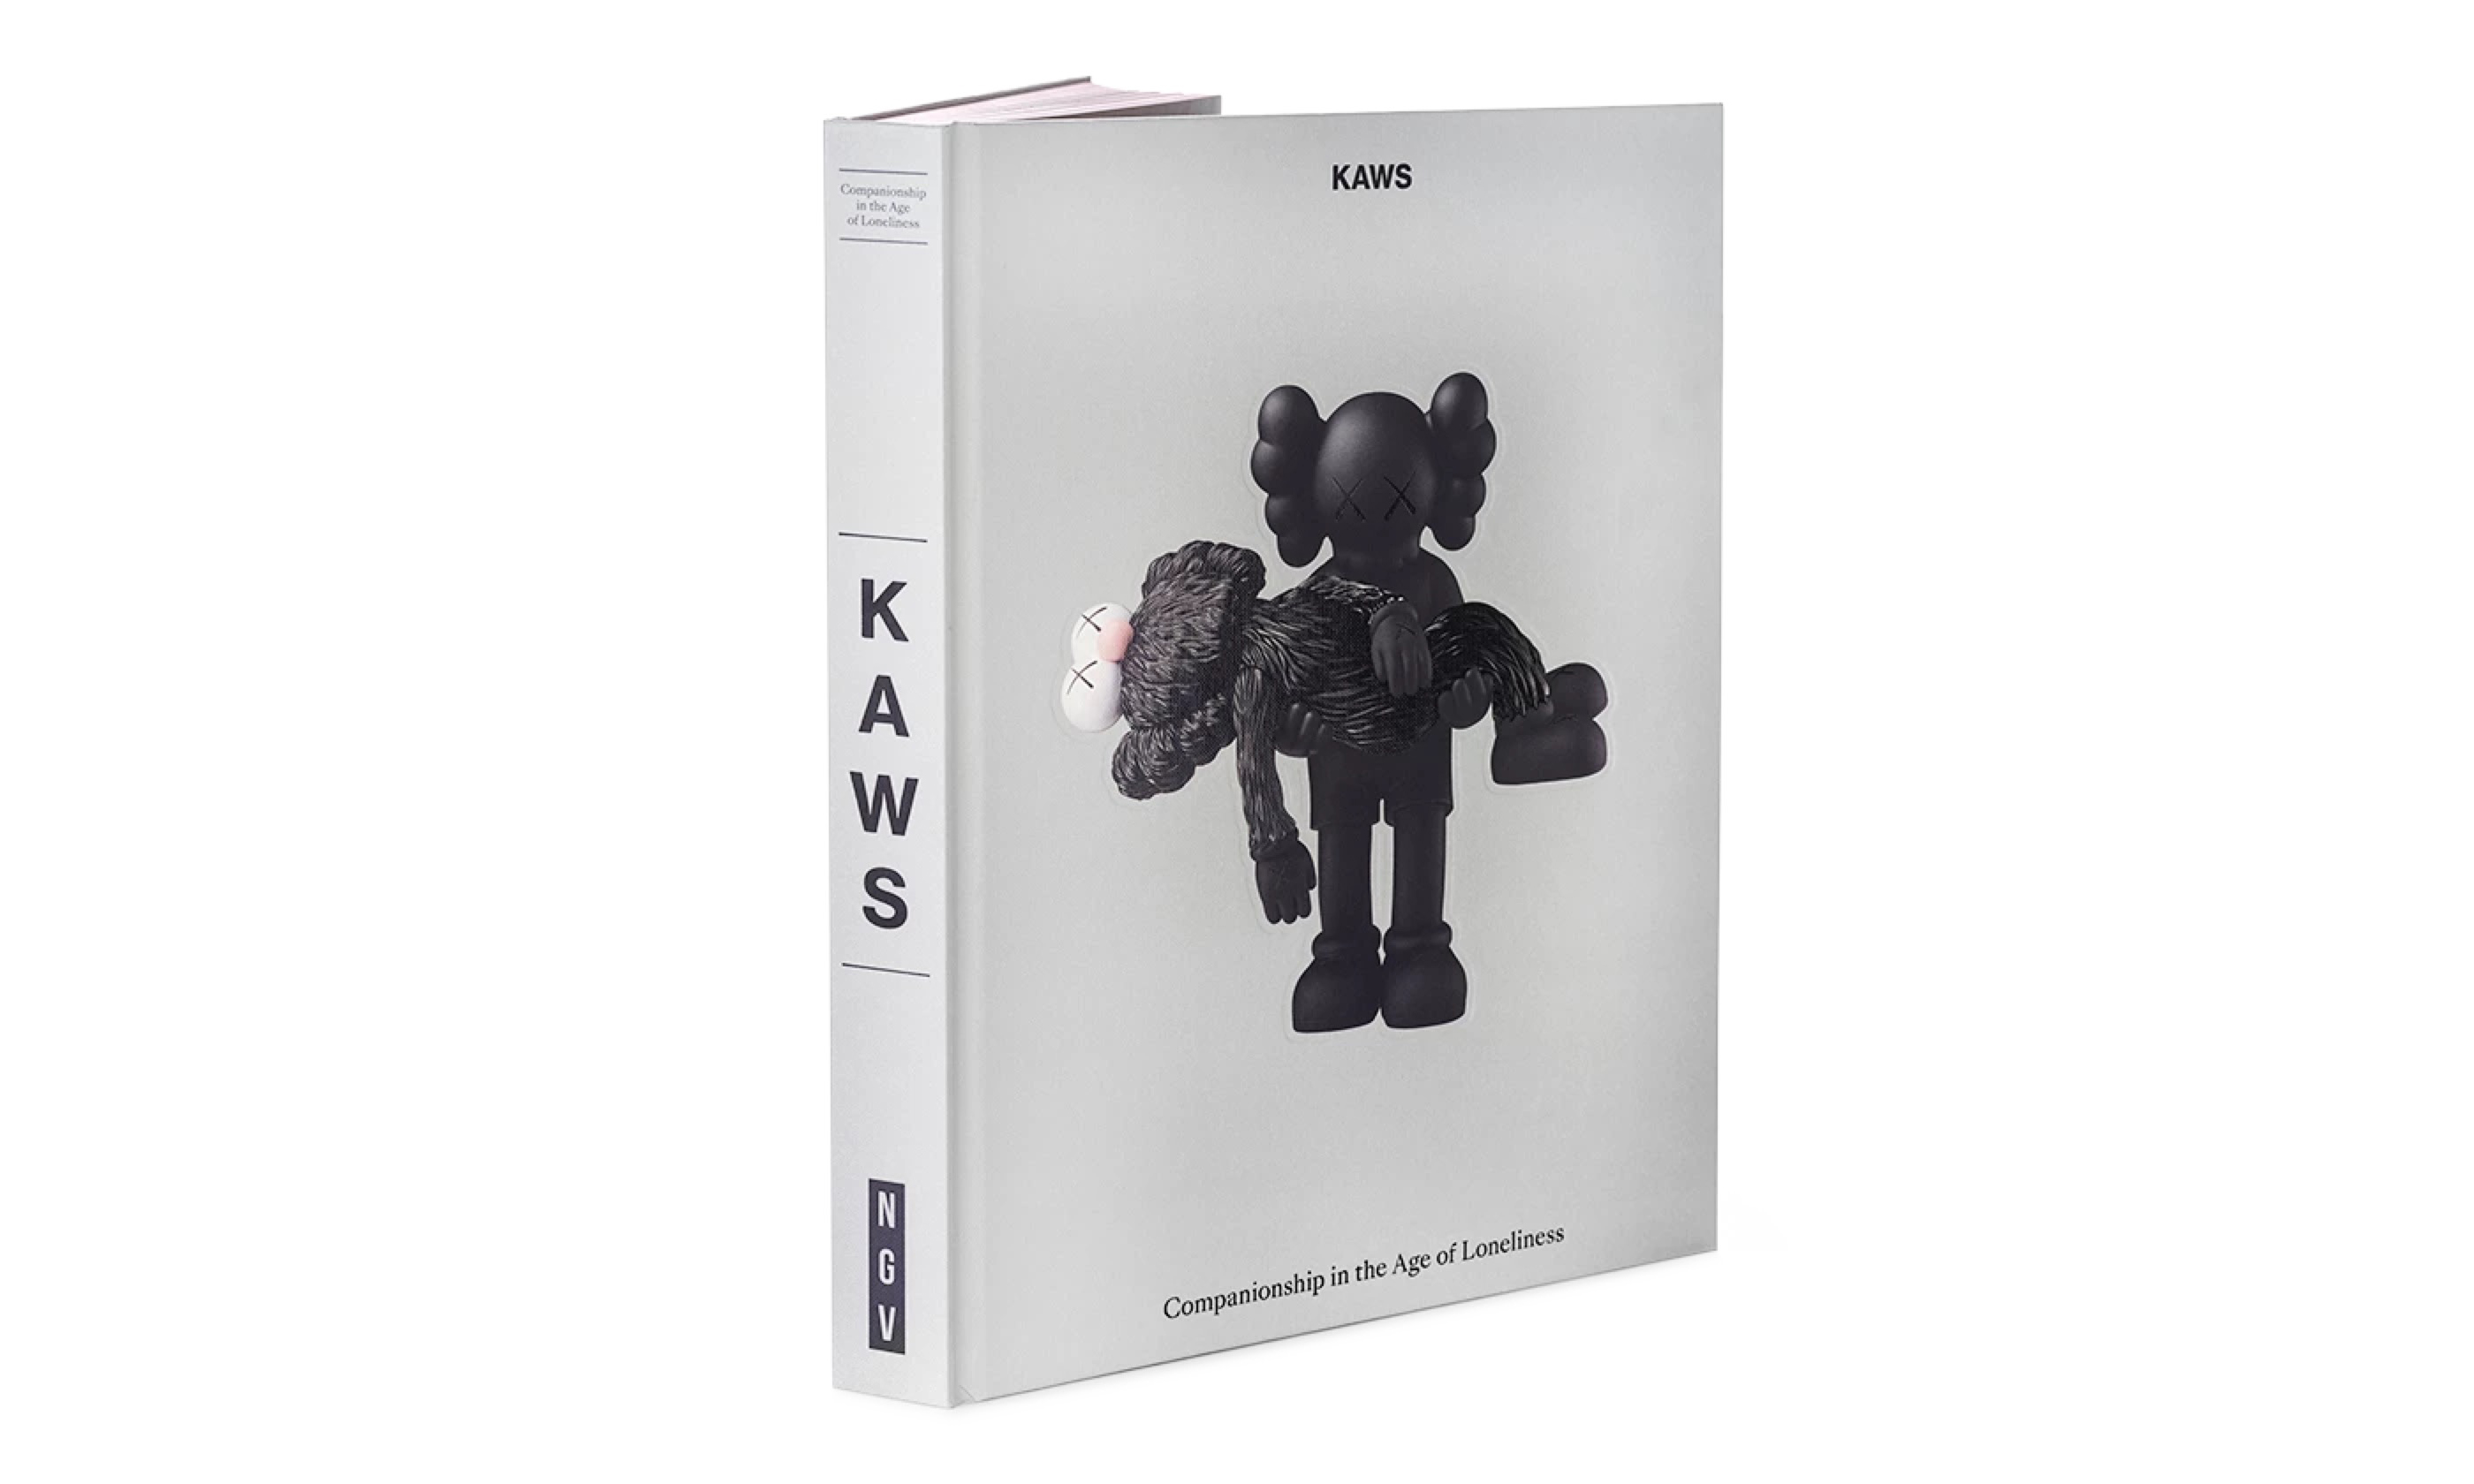 《KAWS: COMPANIONSHIP IN THE AGE OF LONELINESS》现已开售